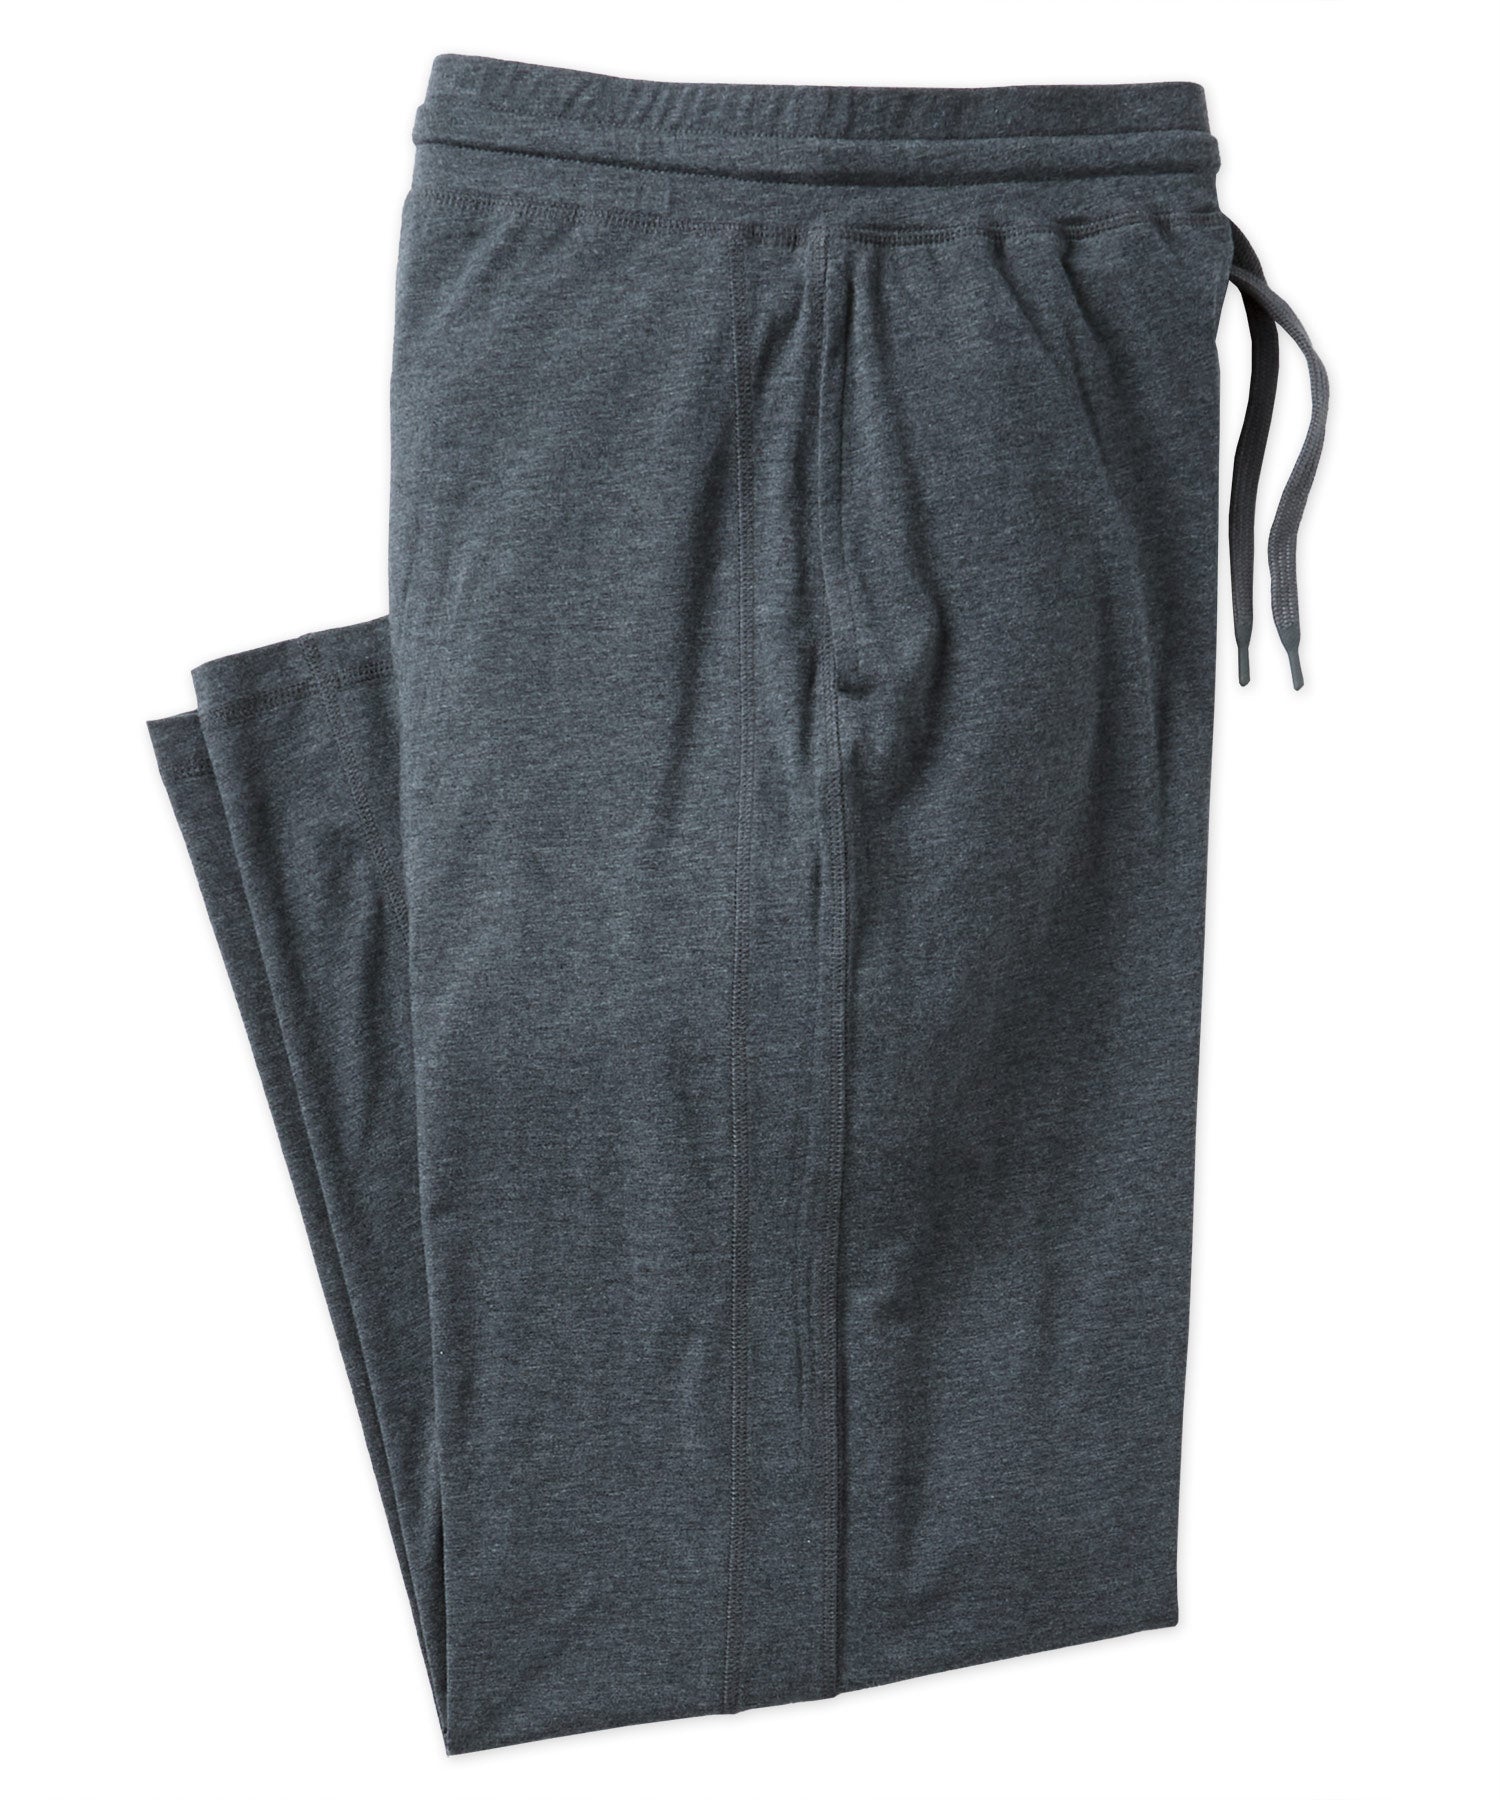 Under Armour Ripstop Woven Pants Pitch Gray/Black